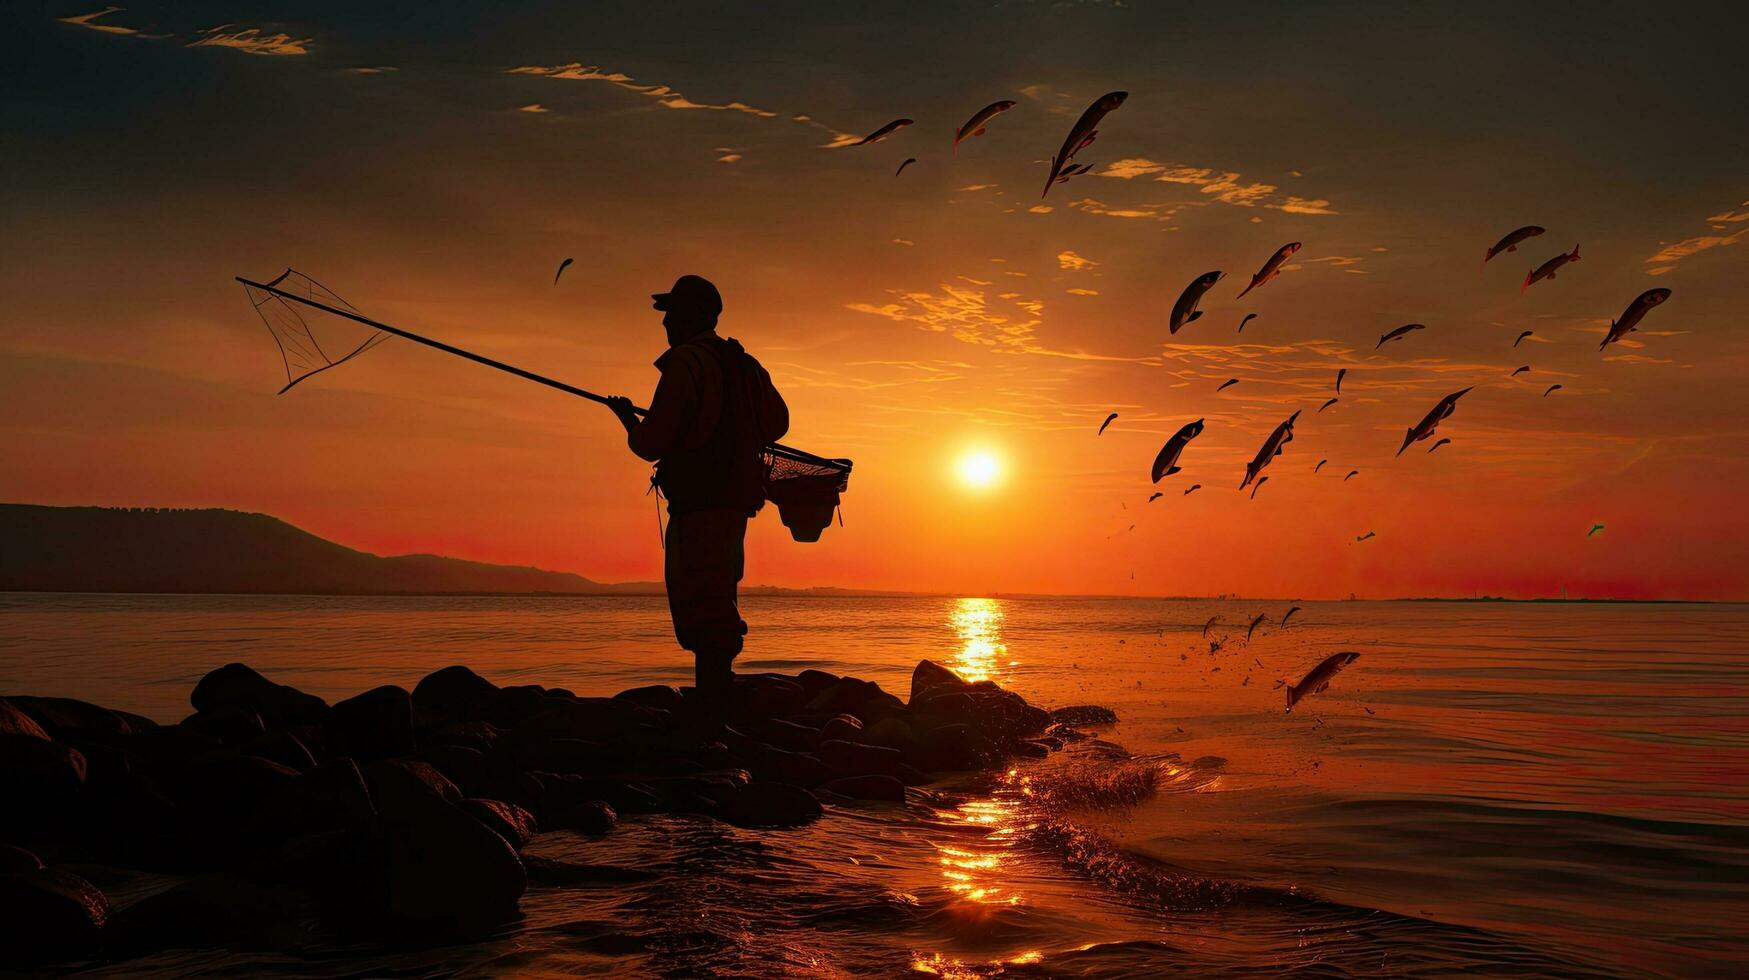 Fisherman strolling along the shore carrying his catch photo